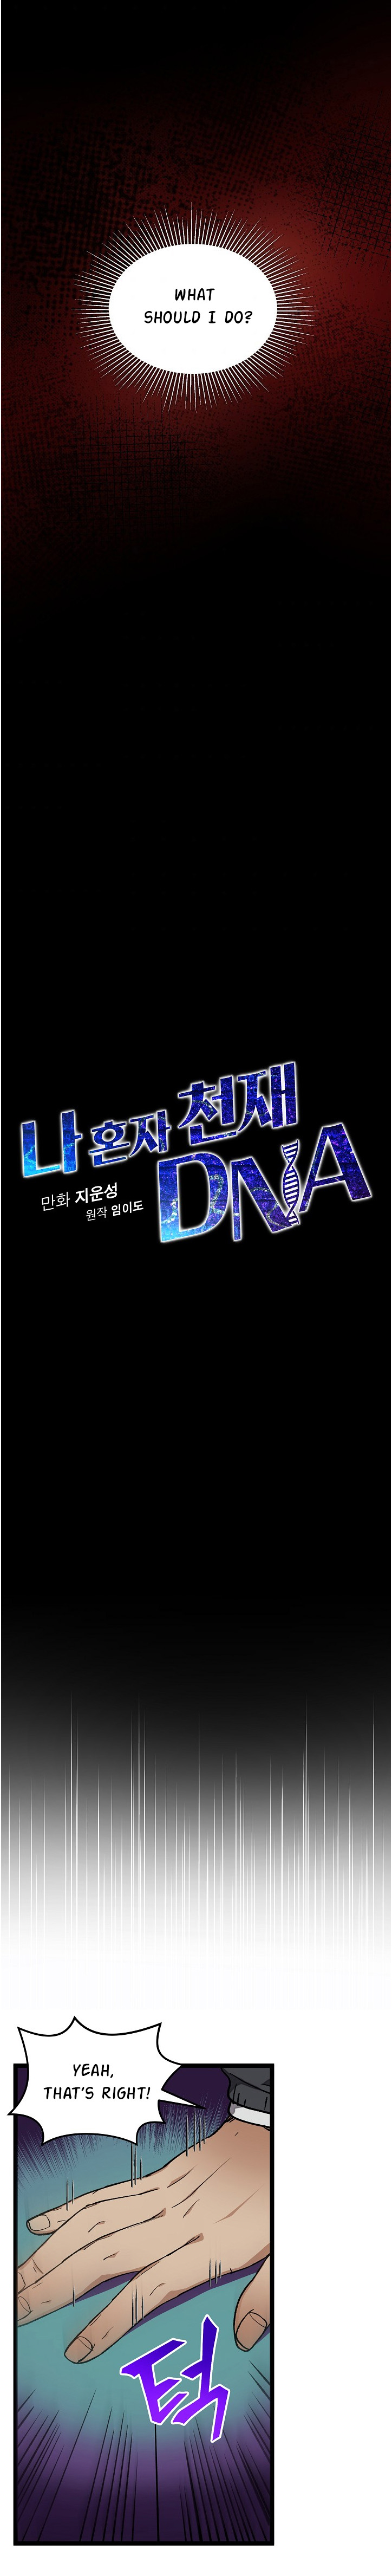 I’M The Only One With Genius Dna - Page 4